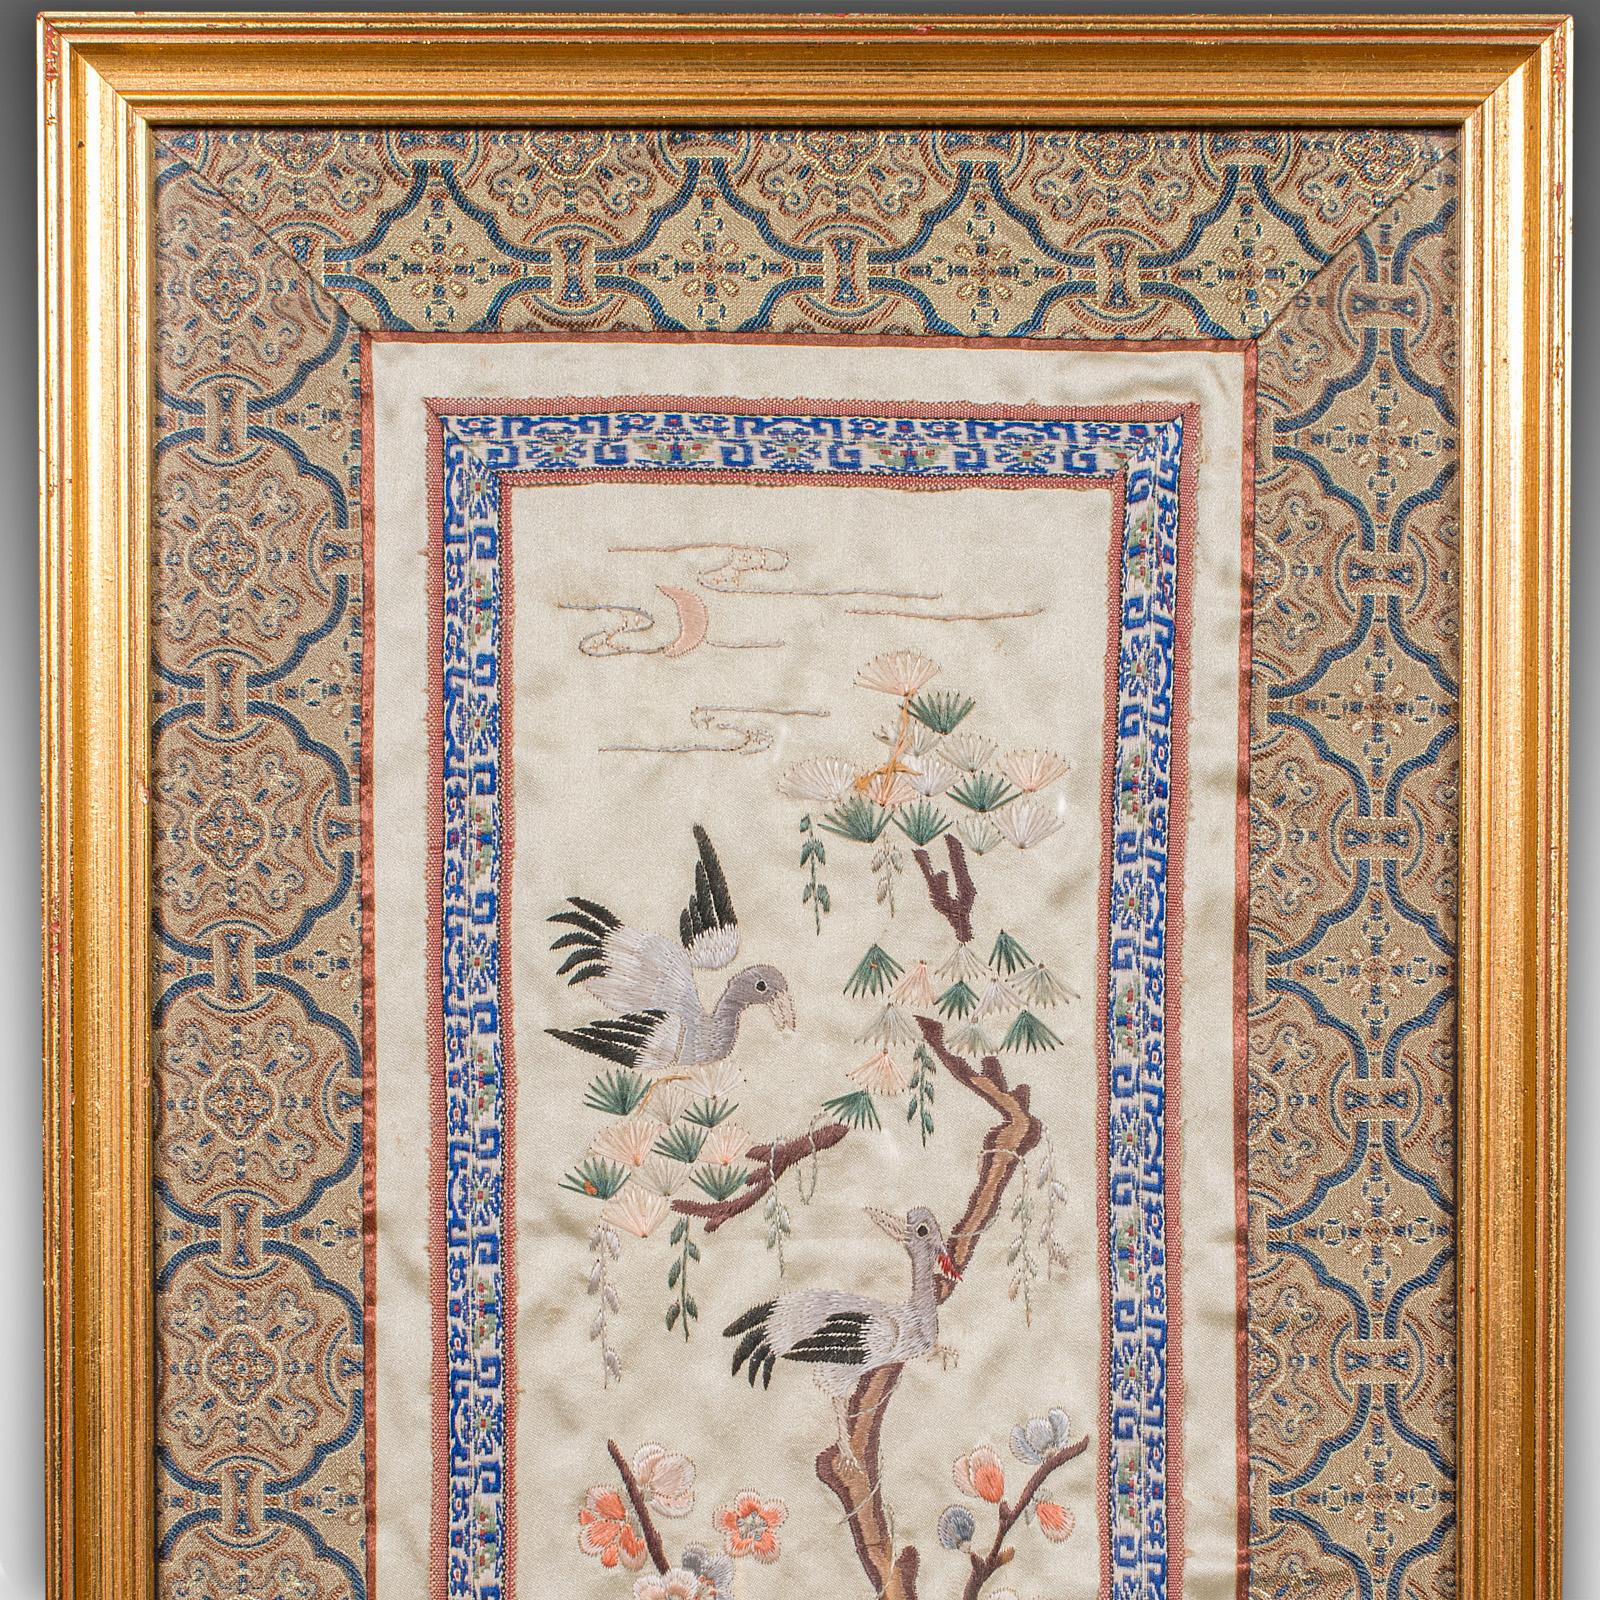 Late Victorian Antique Decorative Panel, Japanese, Framed, Silk Cotton Embroidery, Victorian